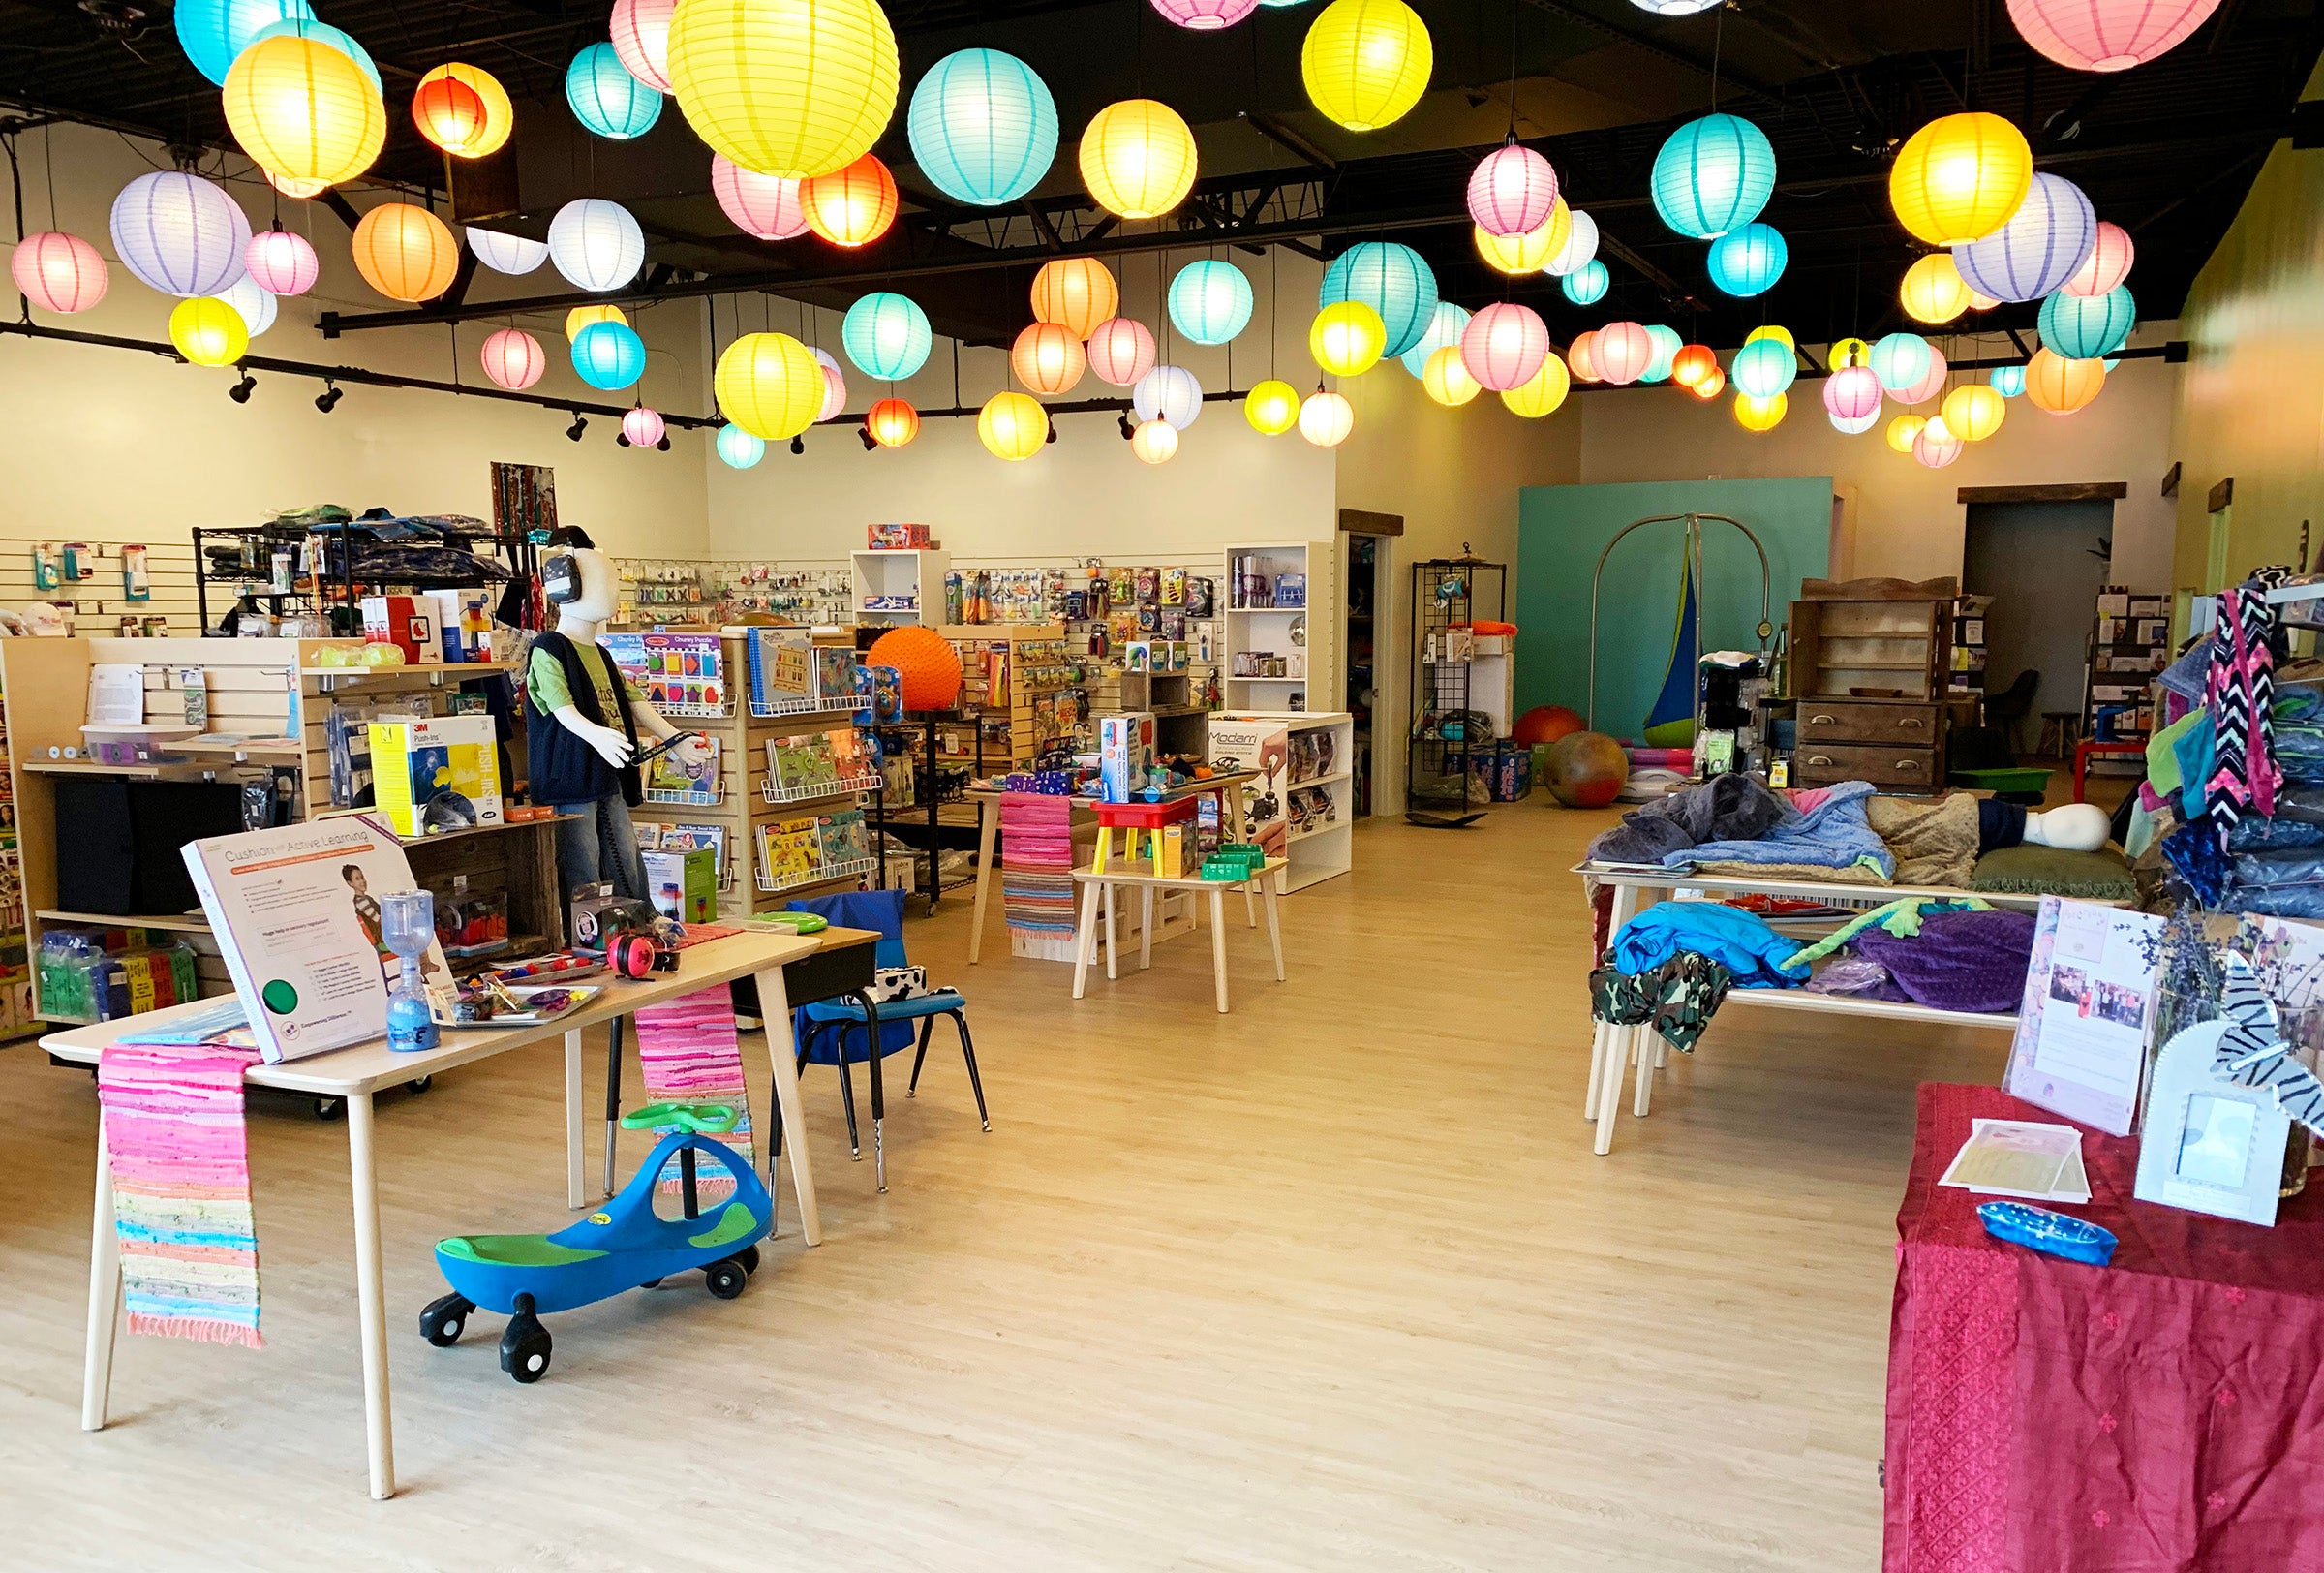 AUTISM KIDS AND SENSORY LAMPS - Brewish Store